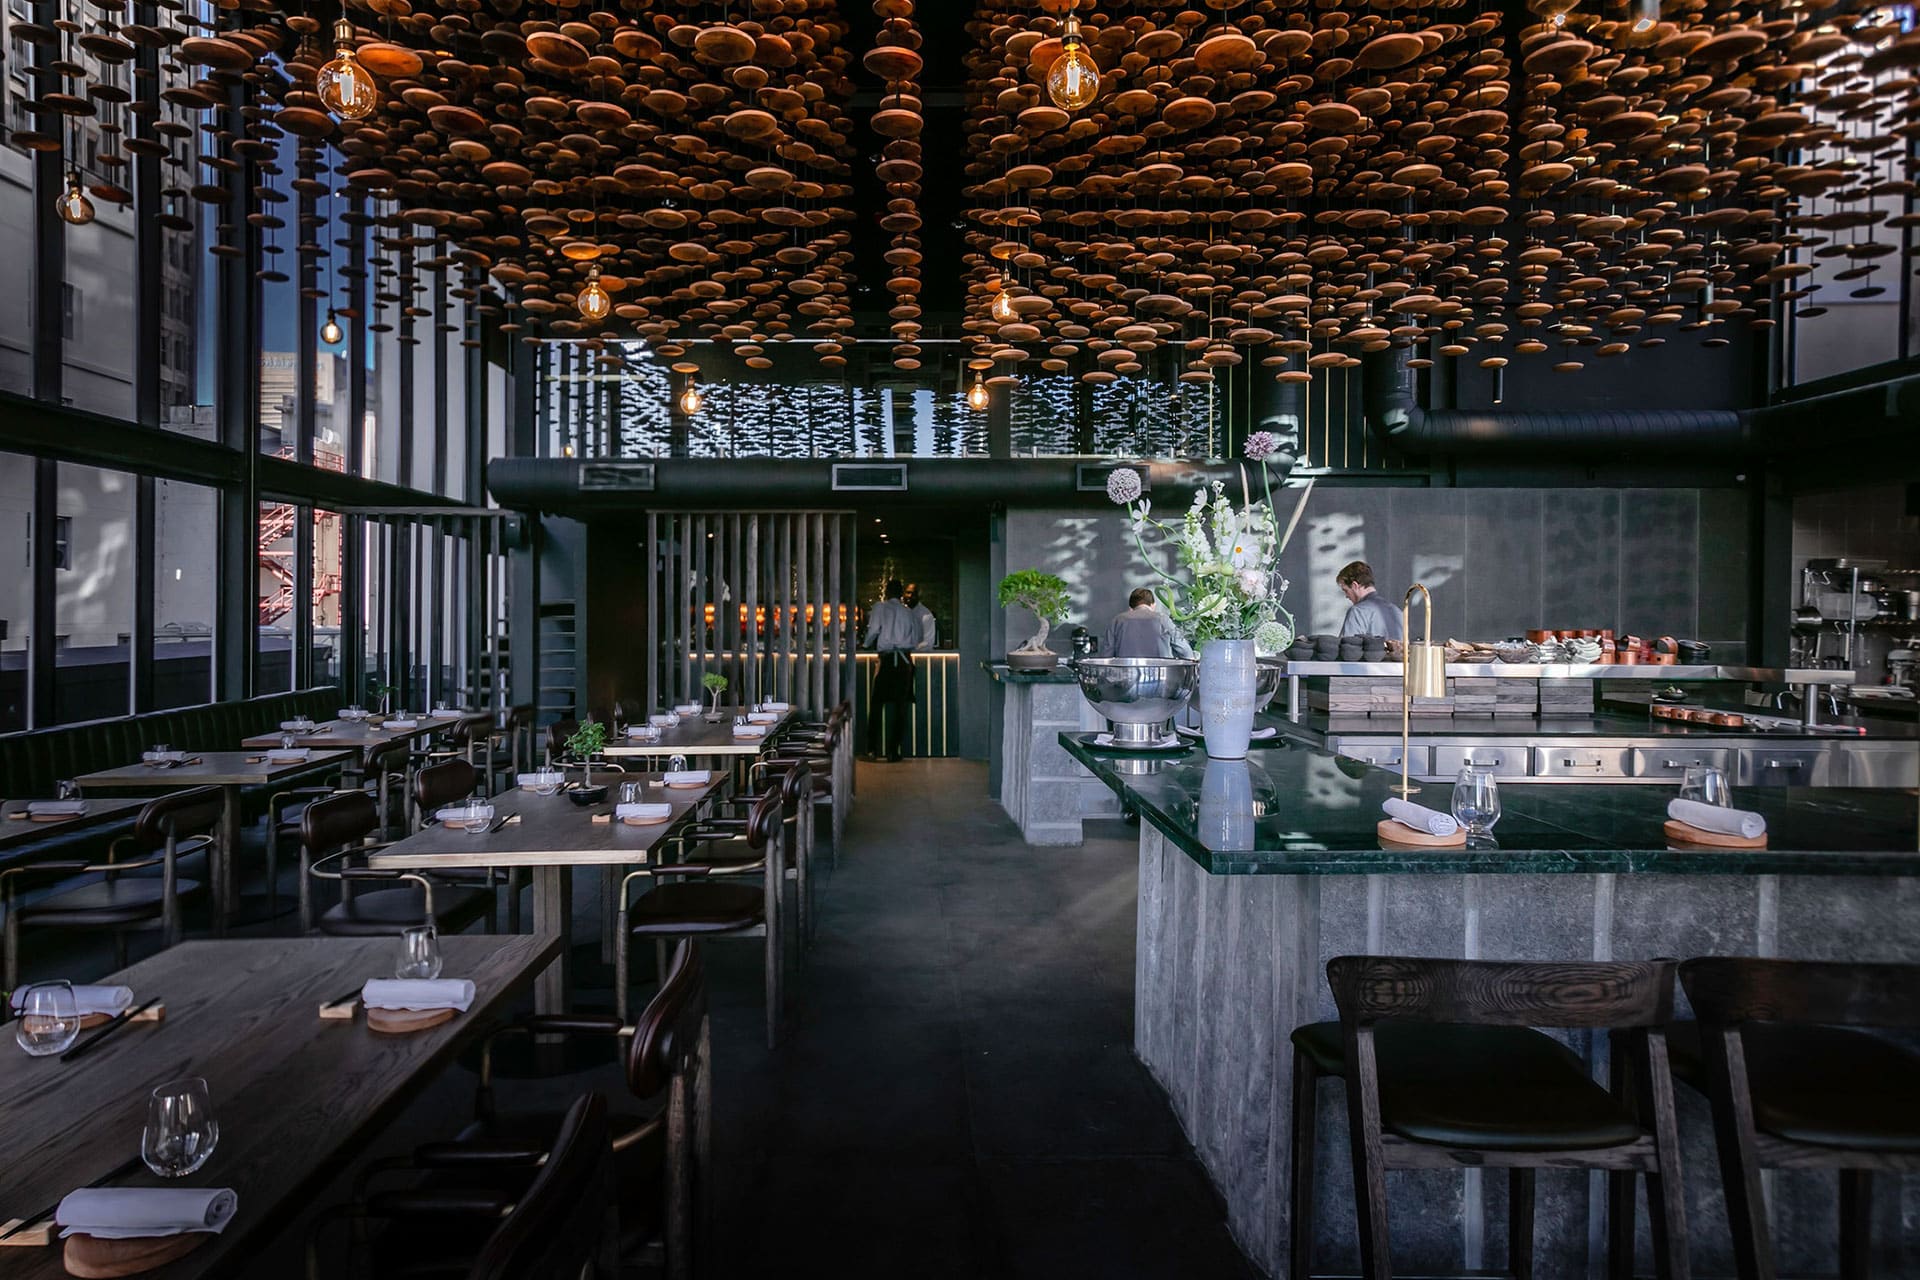 The restaurant interior at FYN – one of the top 10 fine dining restaurants in Cape Town.